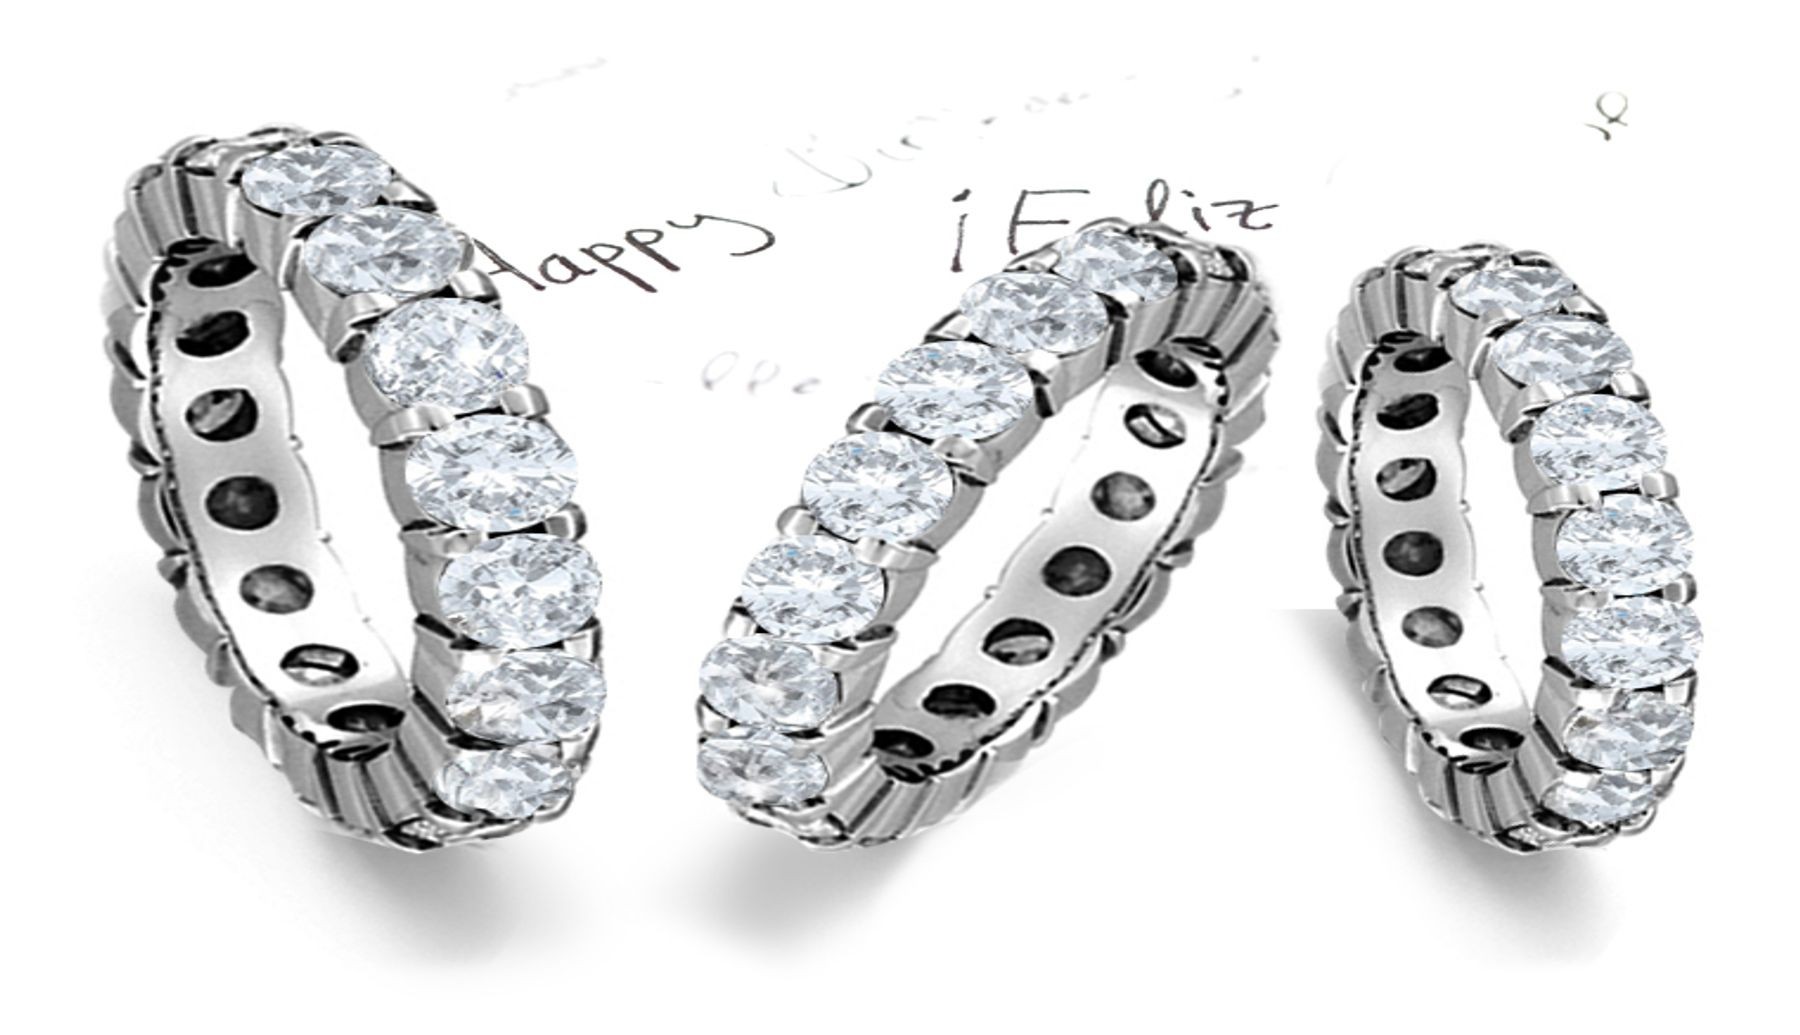 Exceptional Style: Matched 30 Round Diamonds are Set with Shared Prongs which lends to a Classic Tailored Arch Dome Design